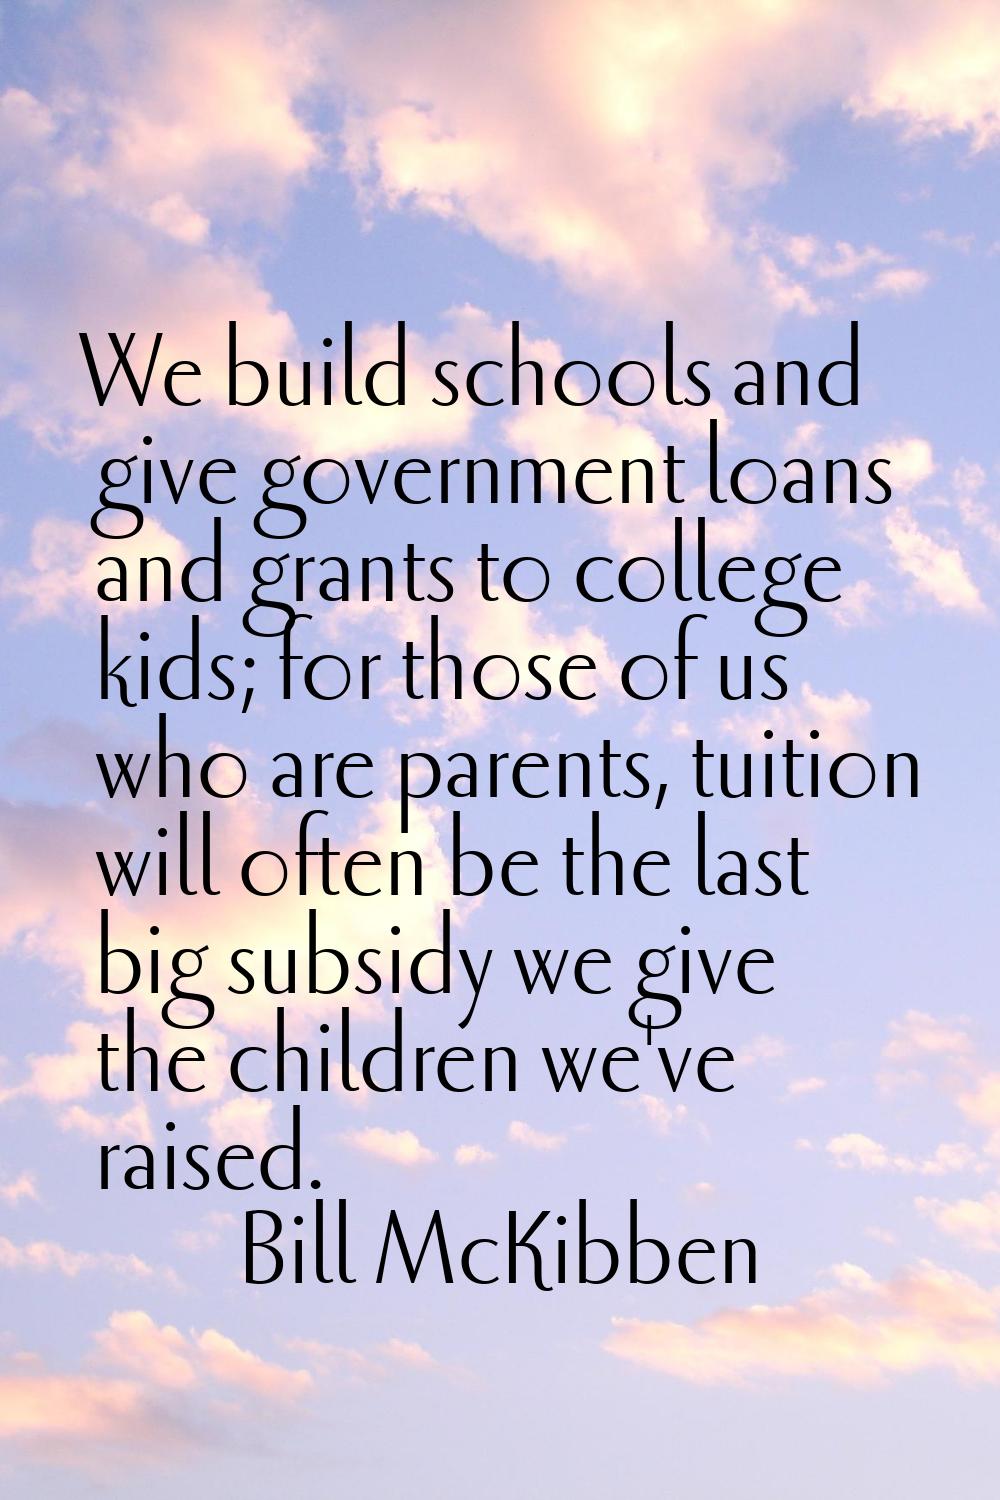 We build schools and give government loans and grants to college kids; for those of us who are pare